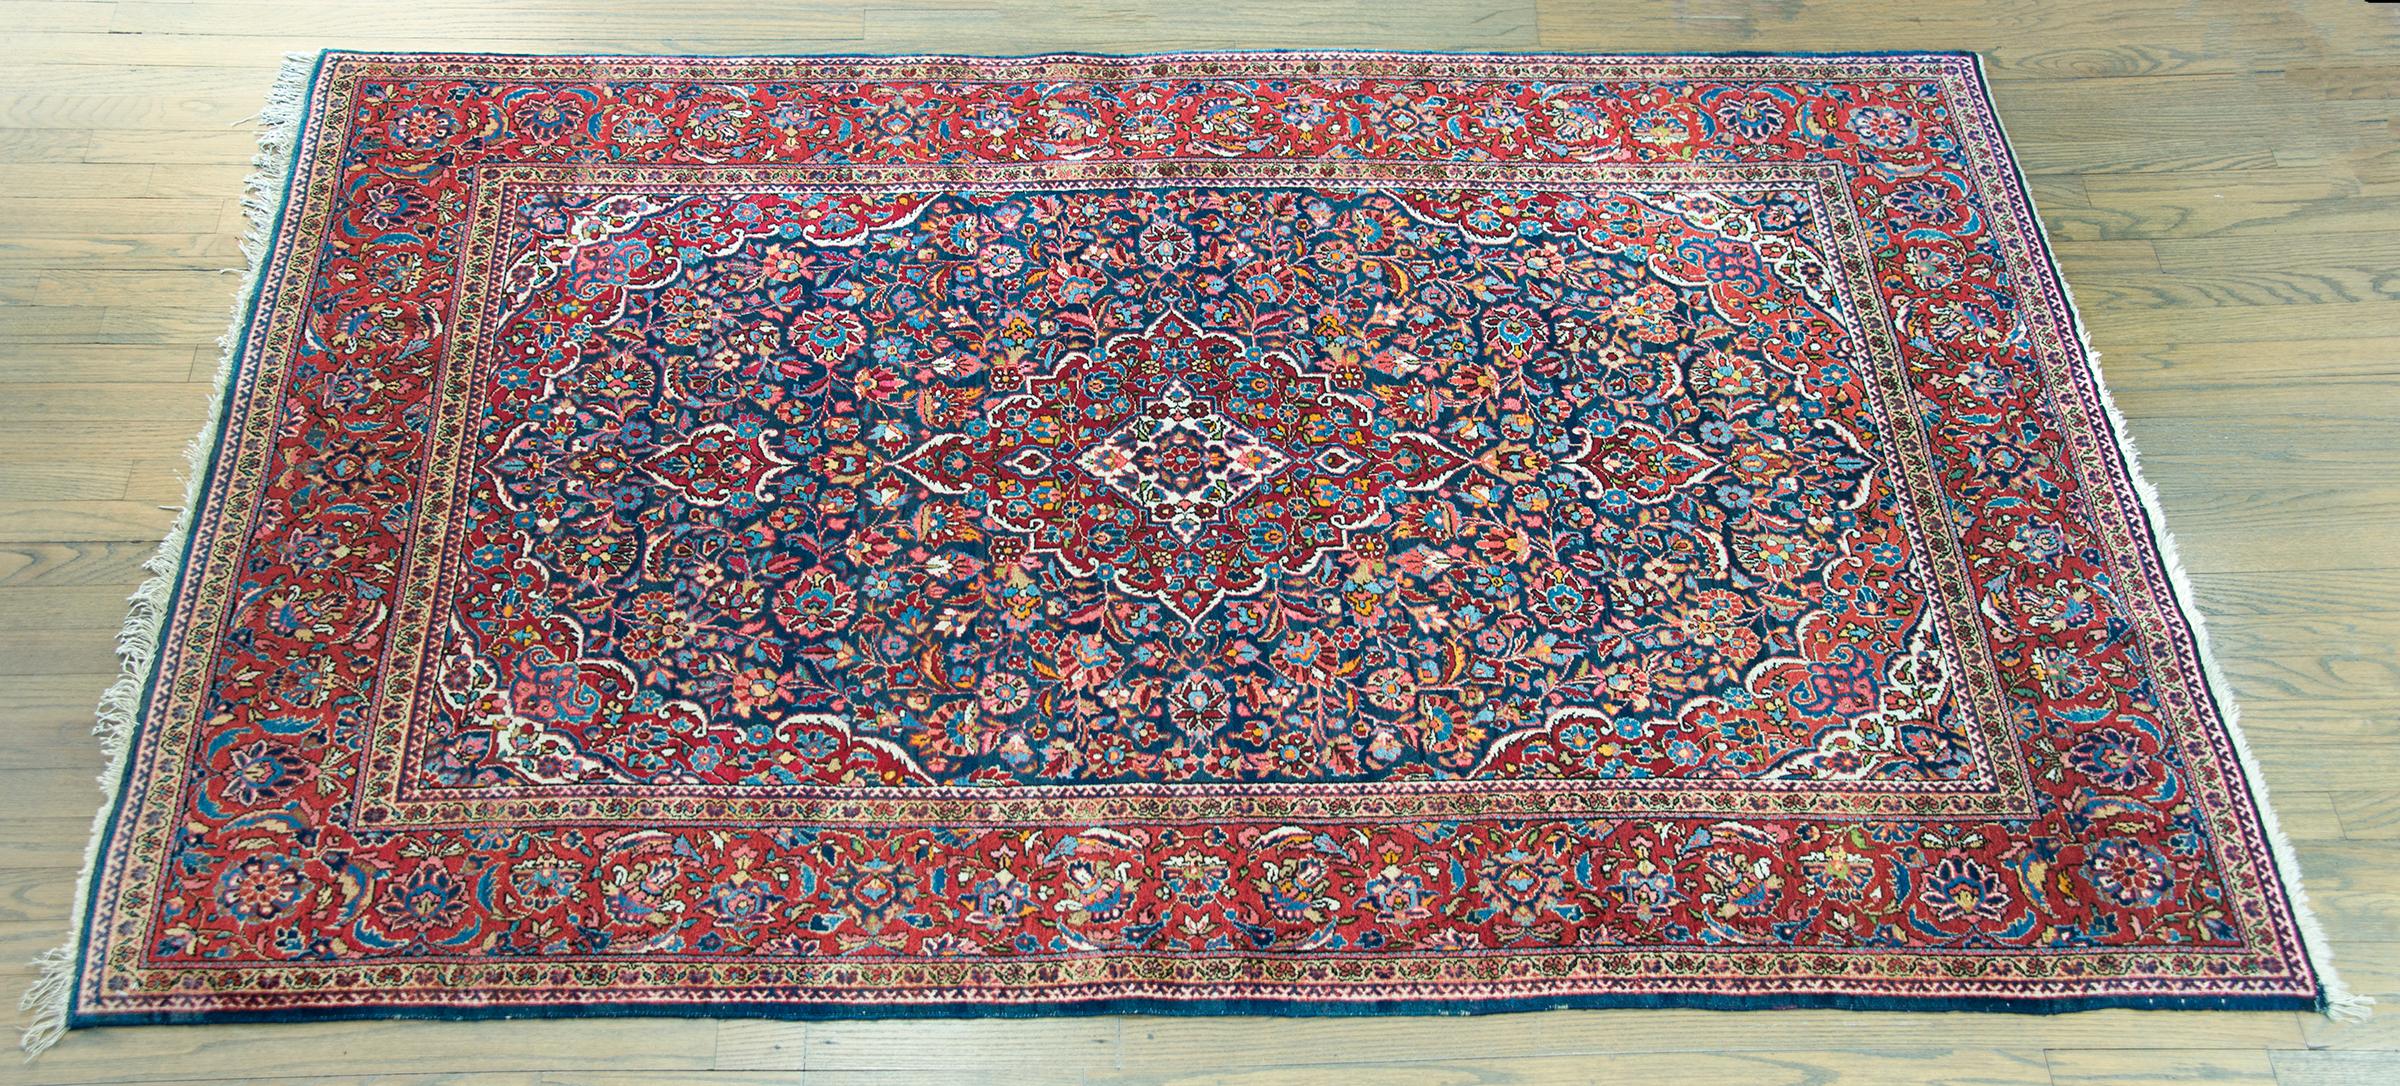 A striking early 20th century Persian Kashan rug with a central medallion living amidst a field of tightly woven flowers and leaves, surrounded by a wide floral border flanked by pairs of petite flowers, and all woven in brilliant crimsons, indigos,